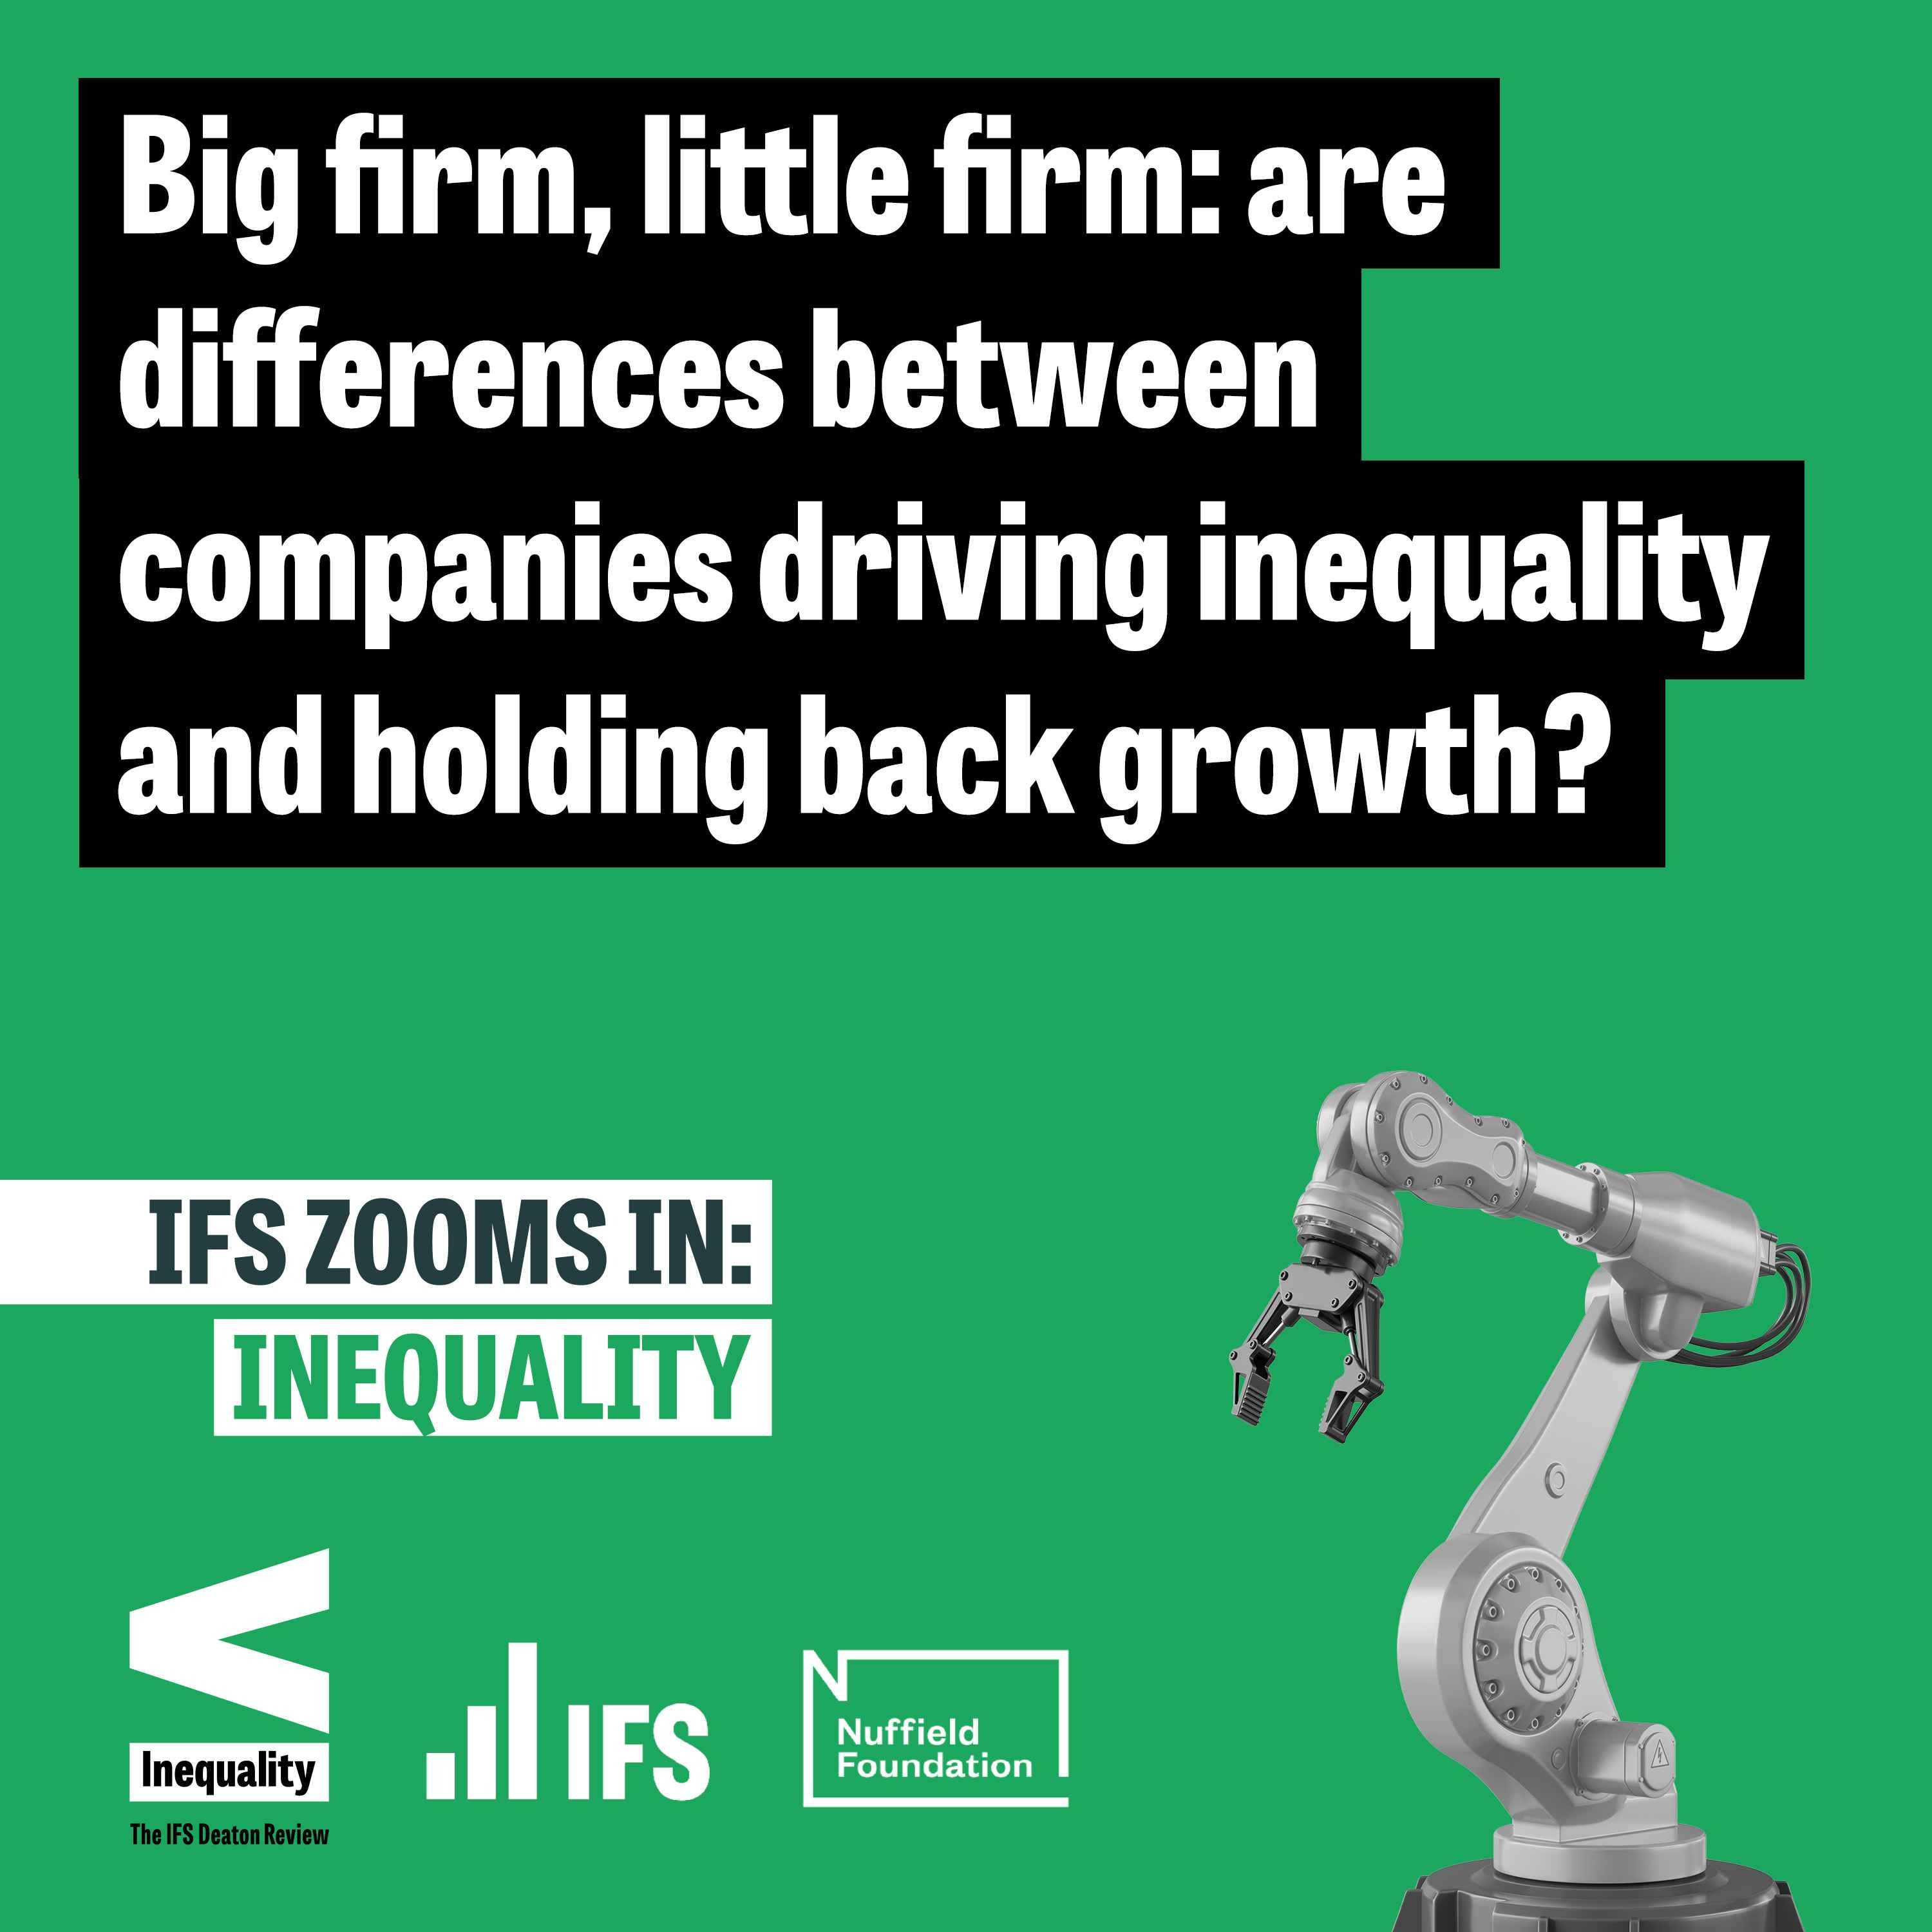 Big firm, little firm: are differences between companies driving inequality and holding back growth?